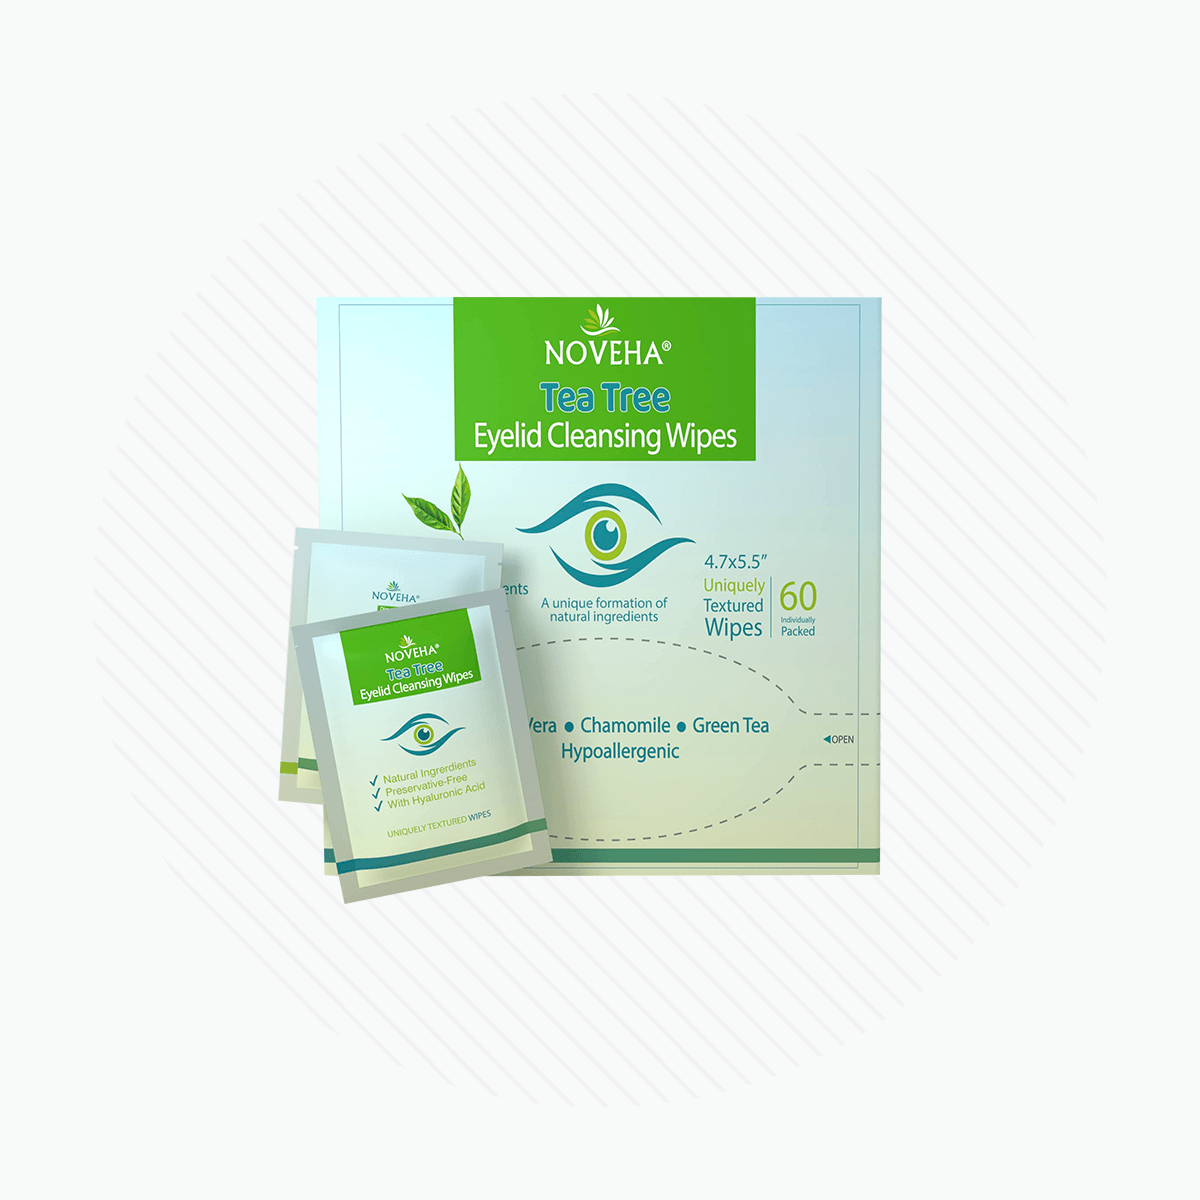 NOVEHA Tea Tree Oil Eyelid & Lash Wipes | With Hyaluronic Acid, Green Tea & Chamomile For Blepharitis, Itchy & Stye Eyes, Individually Wrapped, Natural Eyelash Makeup Remover & Daily Cleanser, 60 Pcs - DryEye Rescue Store